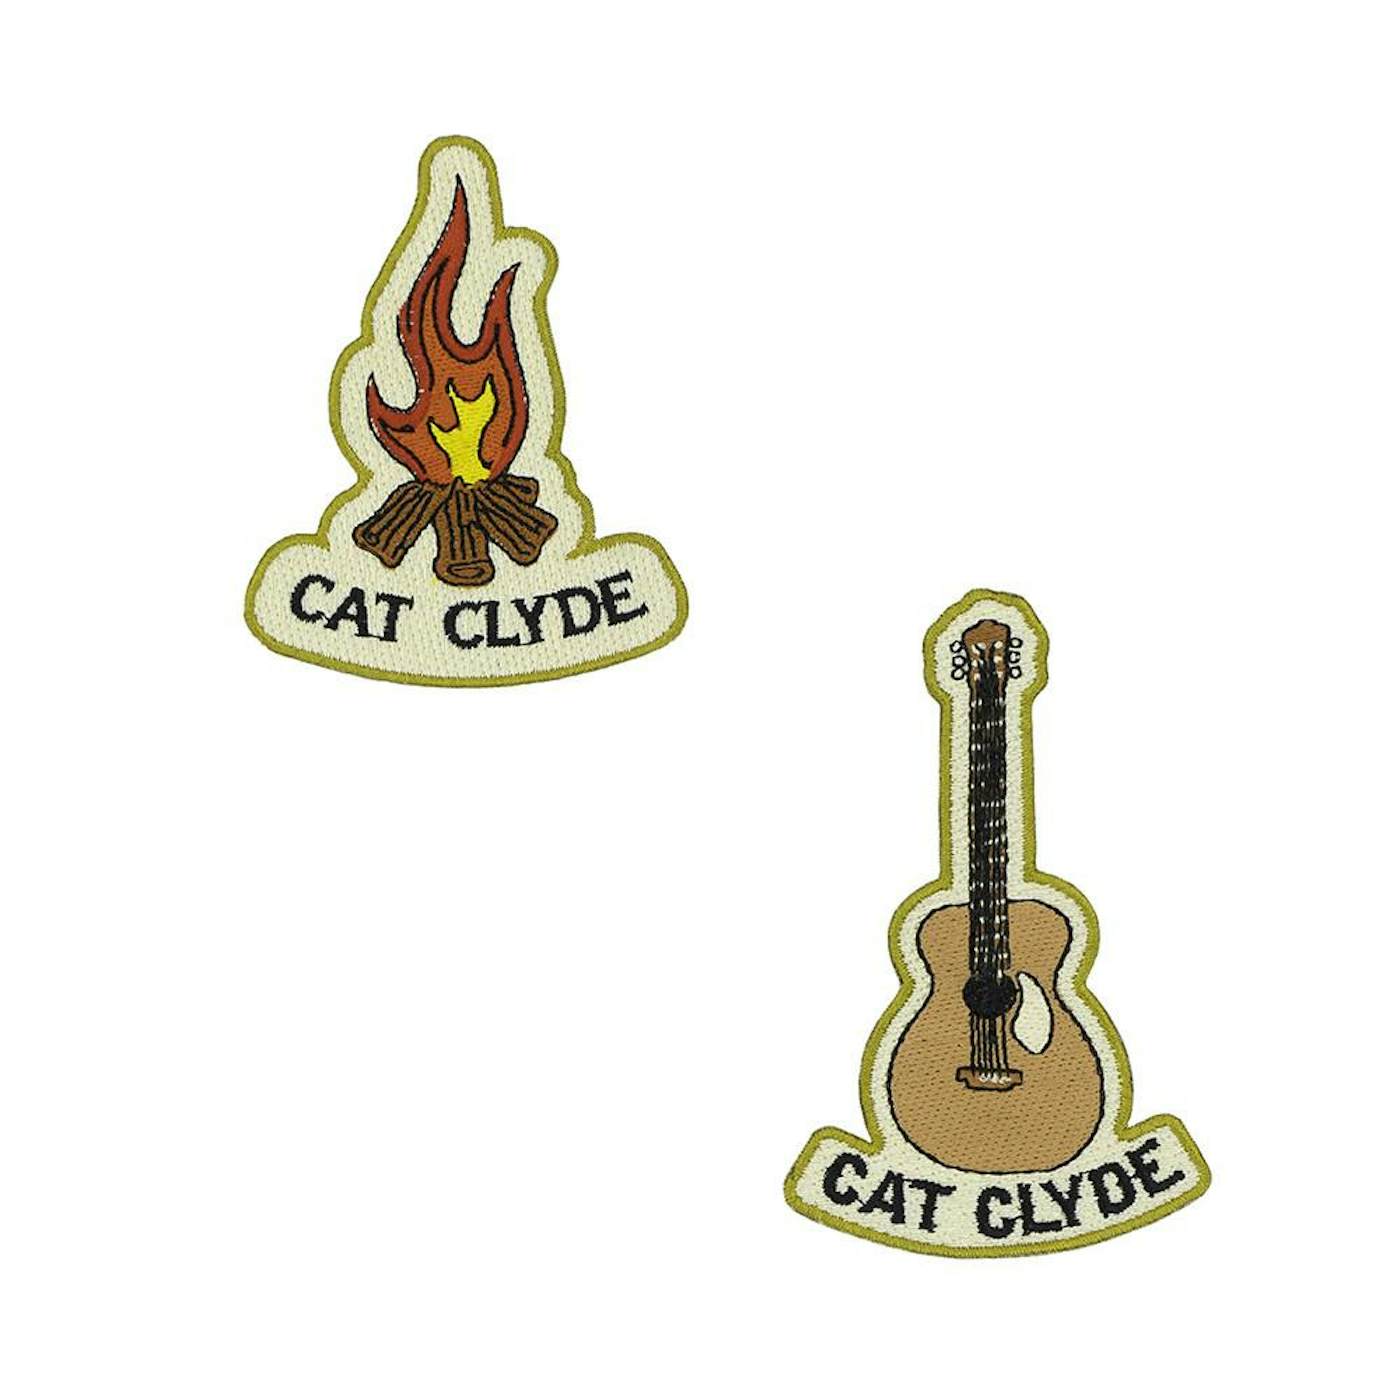 Cat Clyde Both Patches